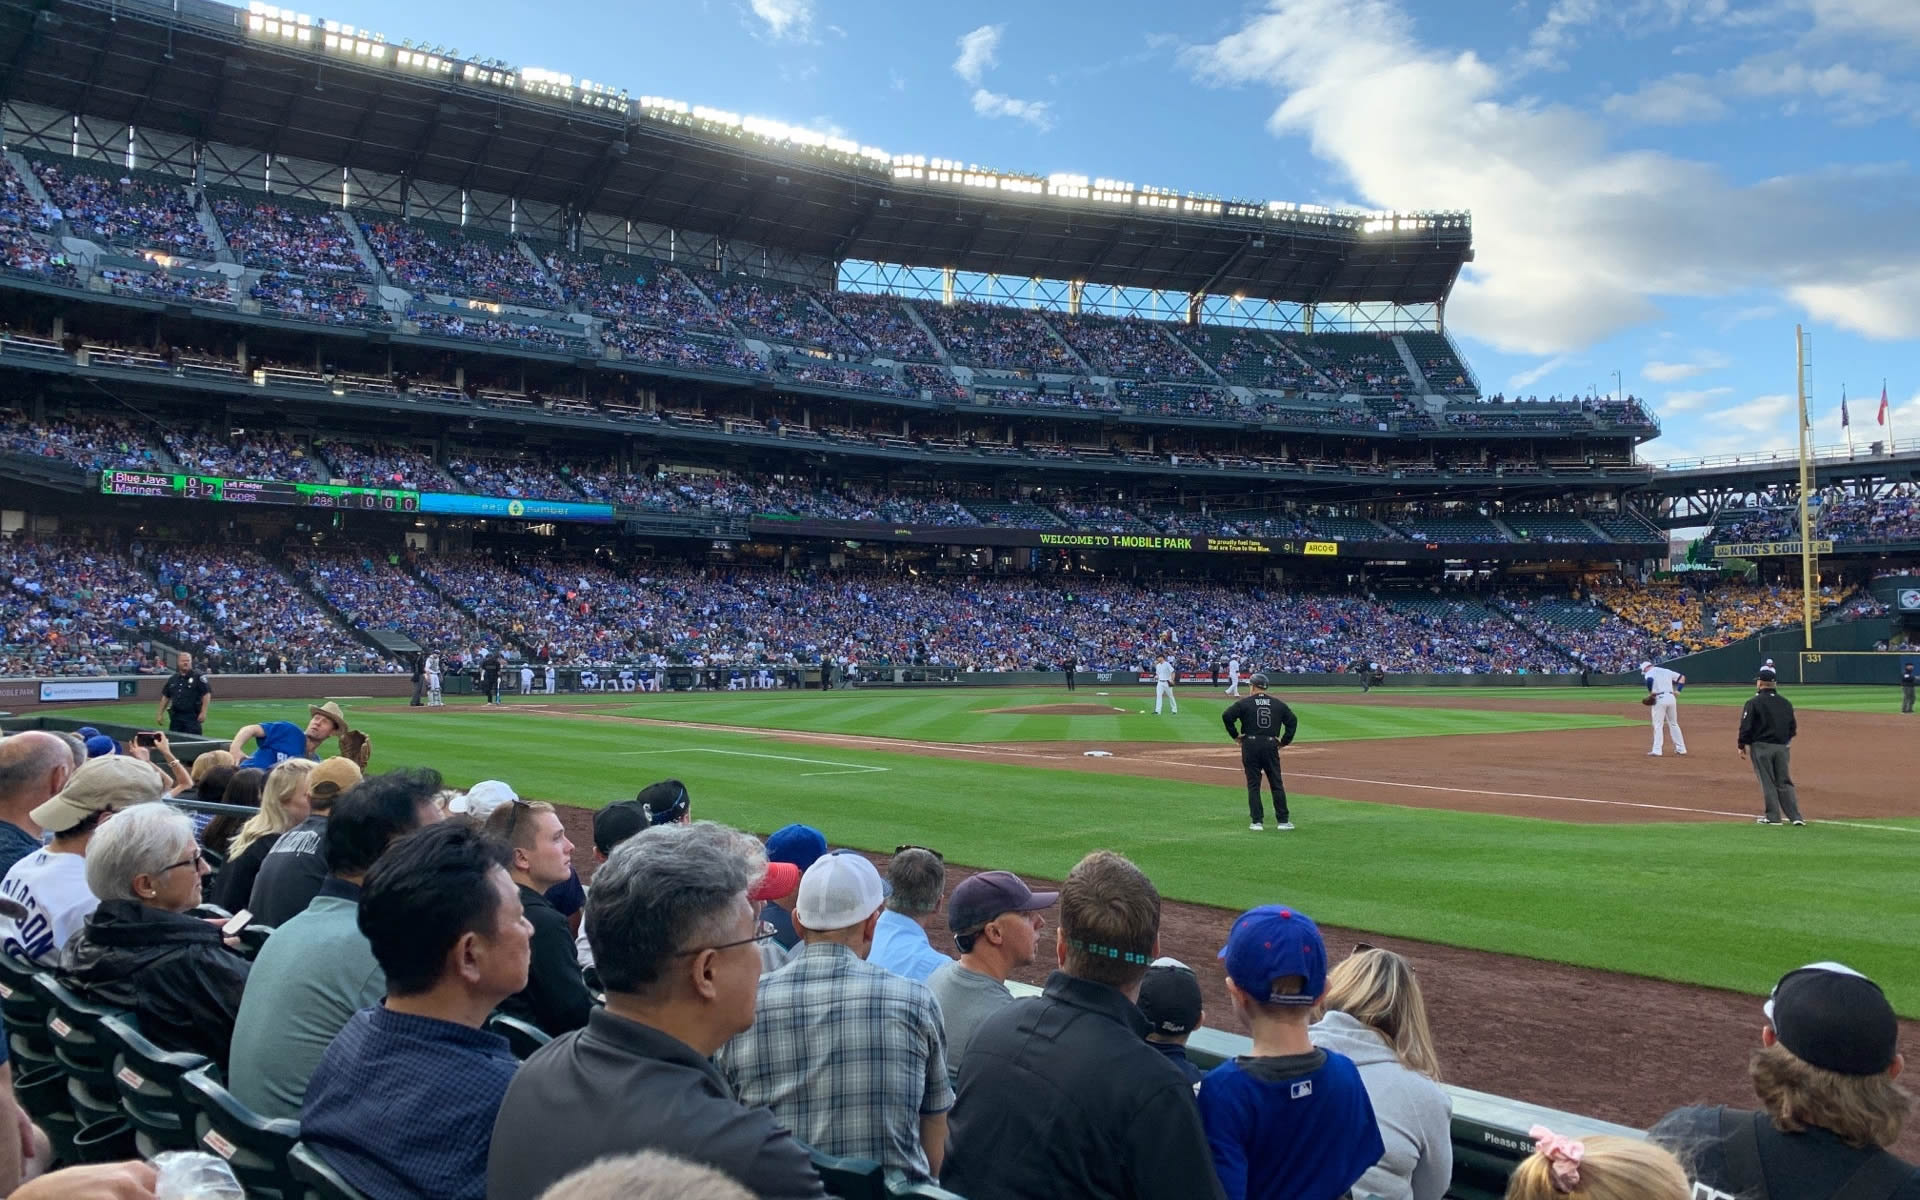 section 119, row 4 seat view  for baseball - t-mobile park